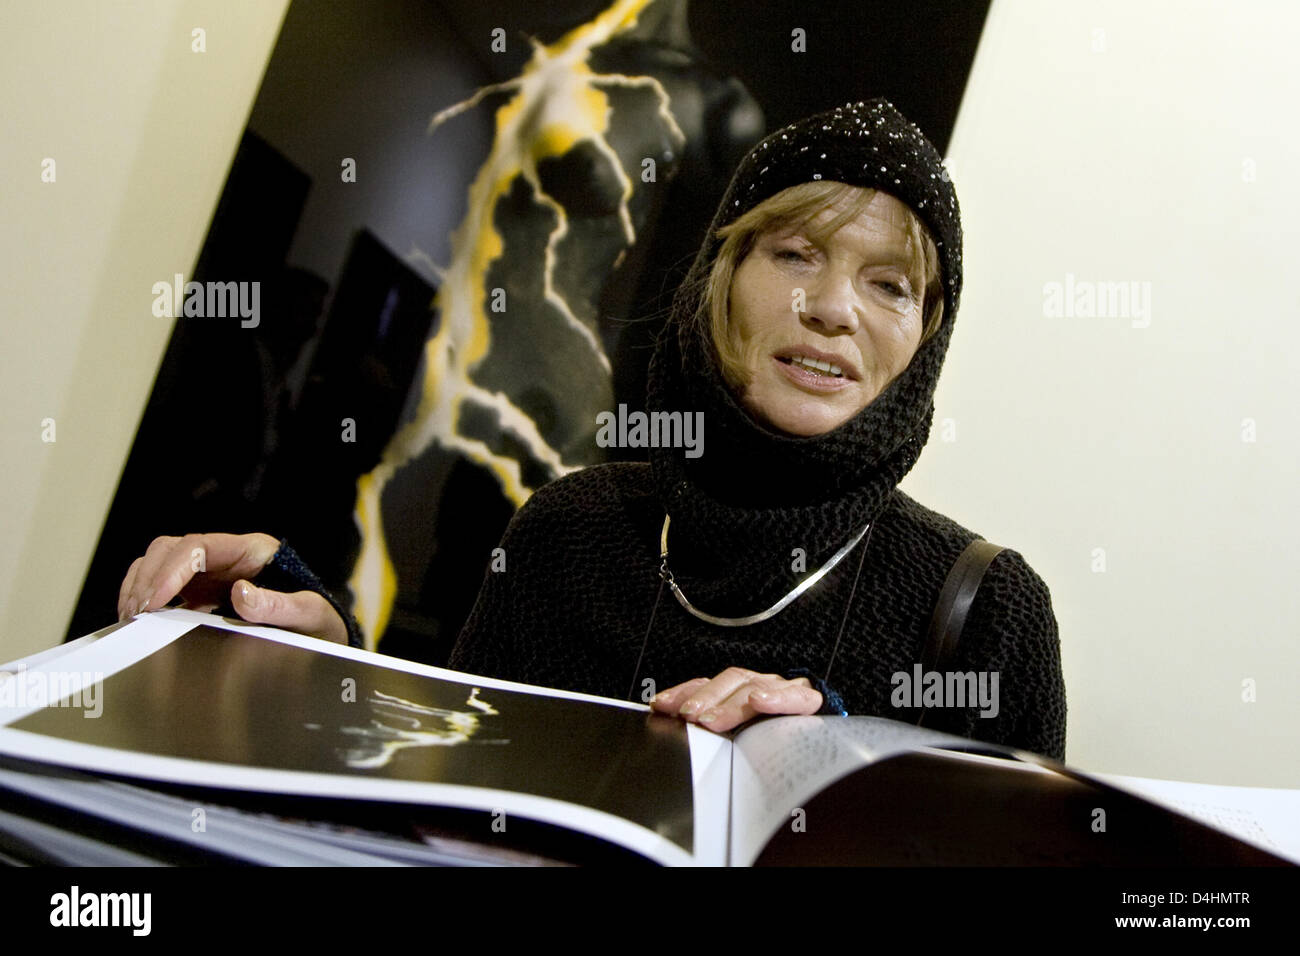 Actress, model, painter and photographer Veruschka von Lehndorff signs one of her books in front of the photography ?Yellow Flash? at the vernissage of the exhibition ?Veruschka? in the Gallery Lumas in Berlin, Germany, 29 January 2009. The exhibition can be visited until 03 March 2009. Photo: ARNO BURGI Stock Photo